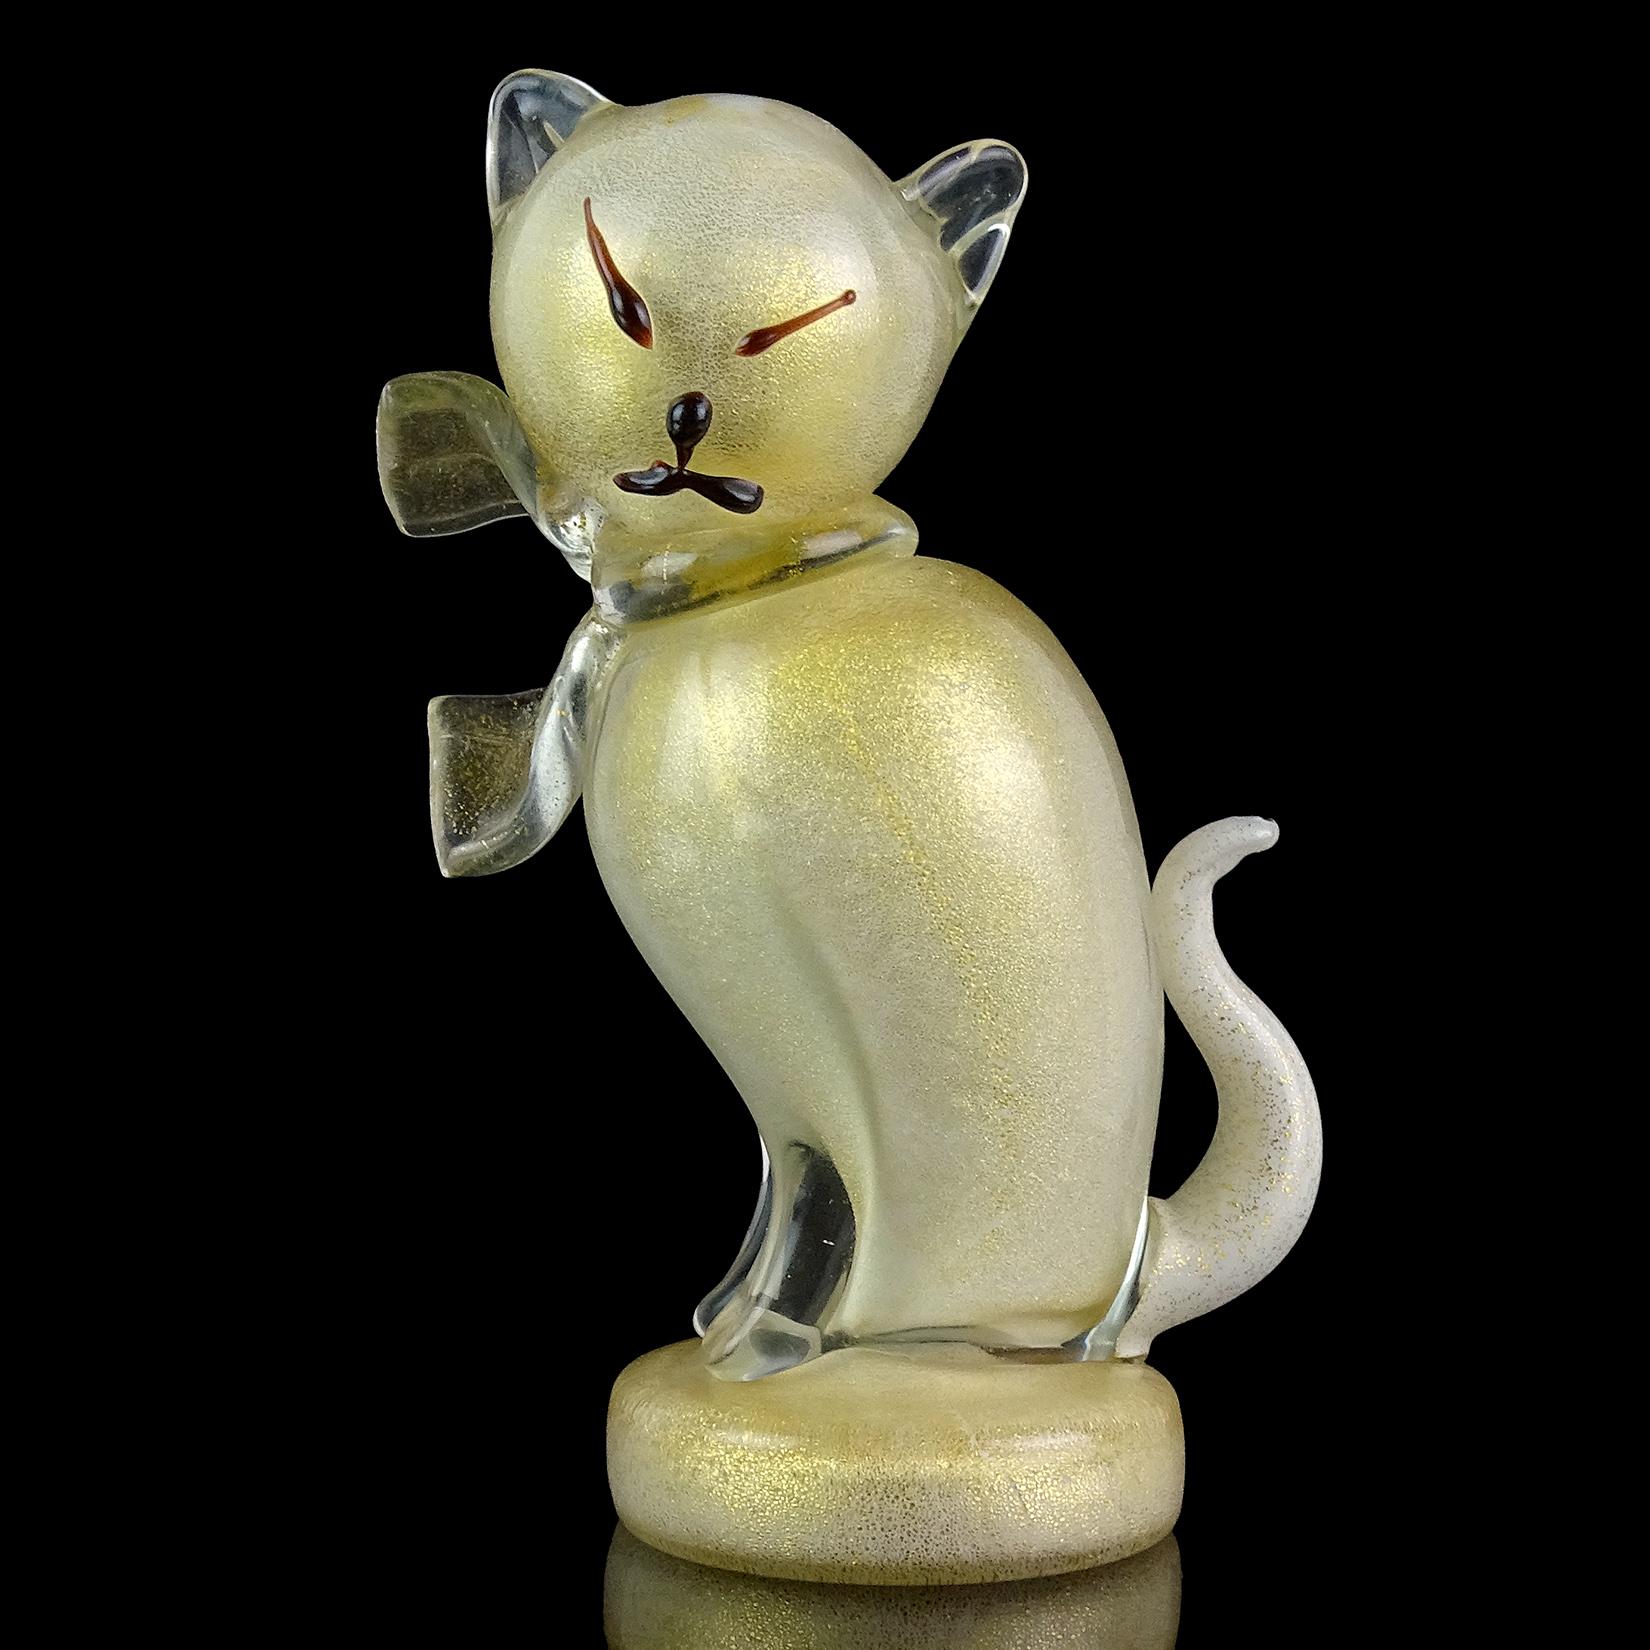 Beautiful vintage Murano hand blown white and gold flecks Italian art glass kitty cat sculpture figurine. Documented to designer Alfredo Barbini. The piece is profusely covered in gold leaf, with clear bow around its neck. Stands on a round disk,